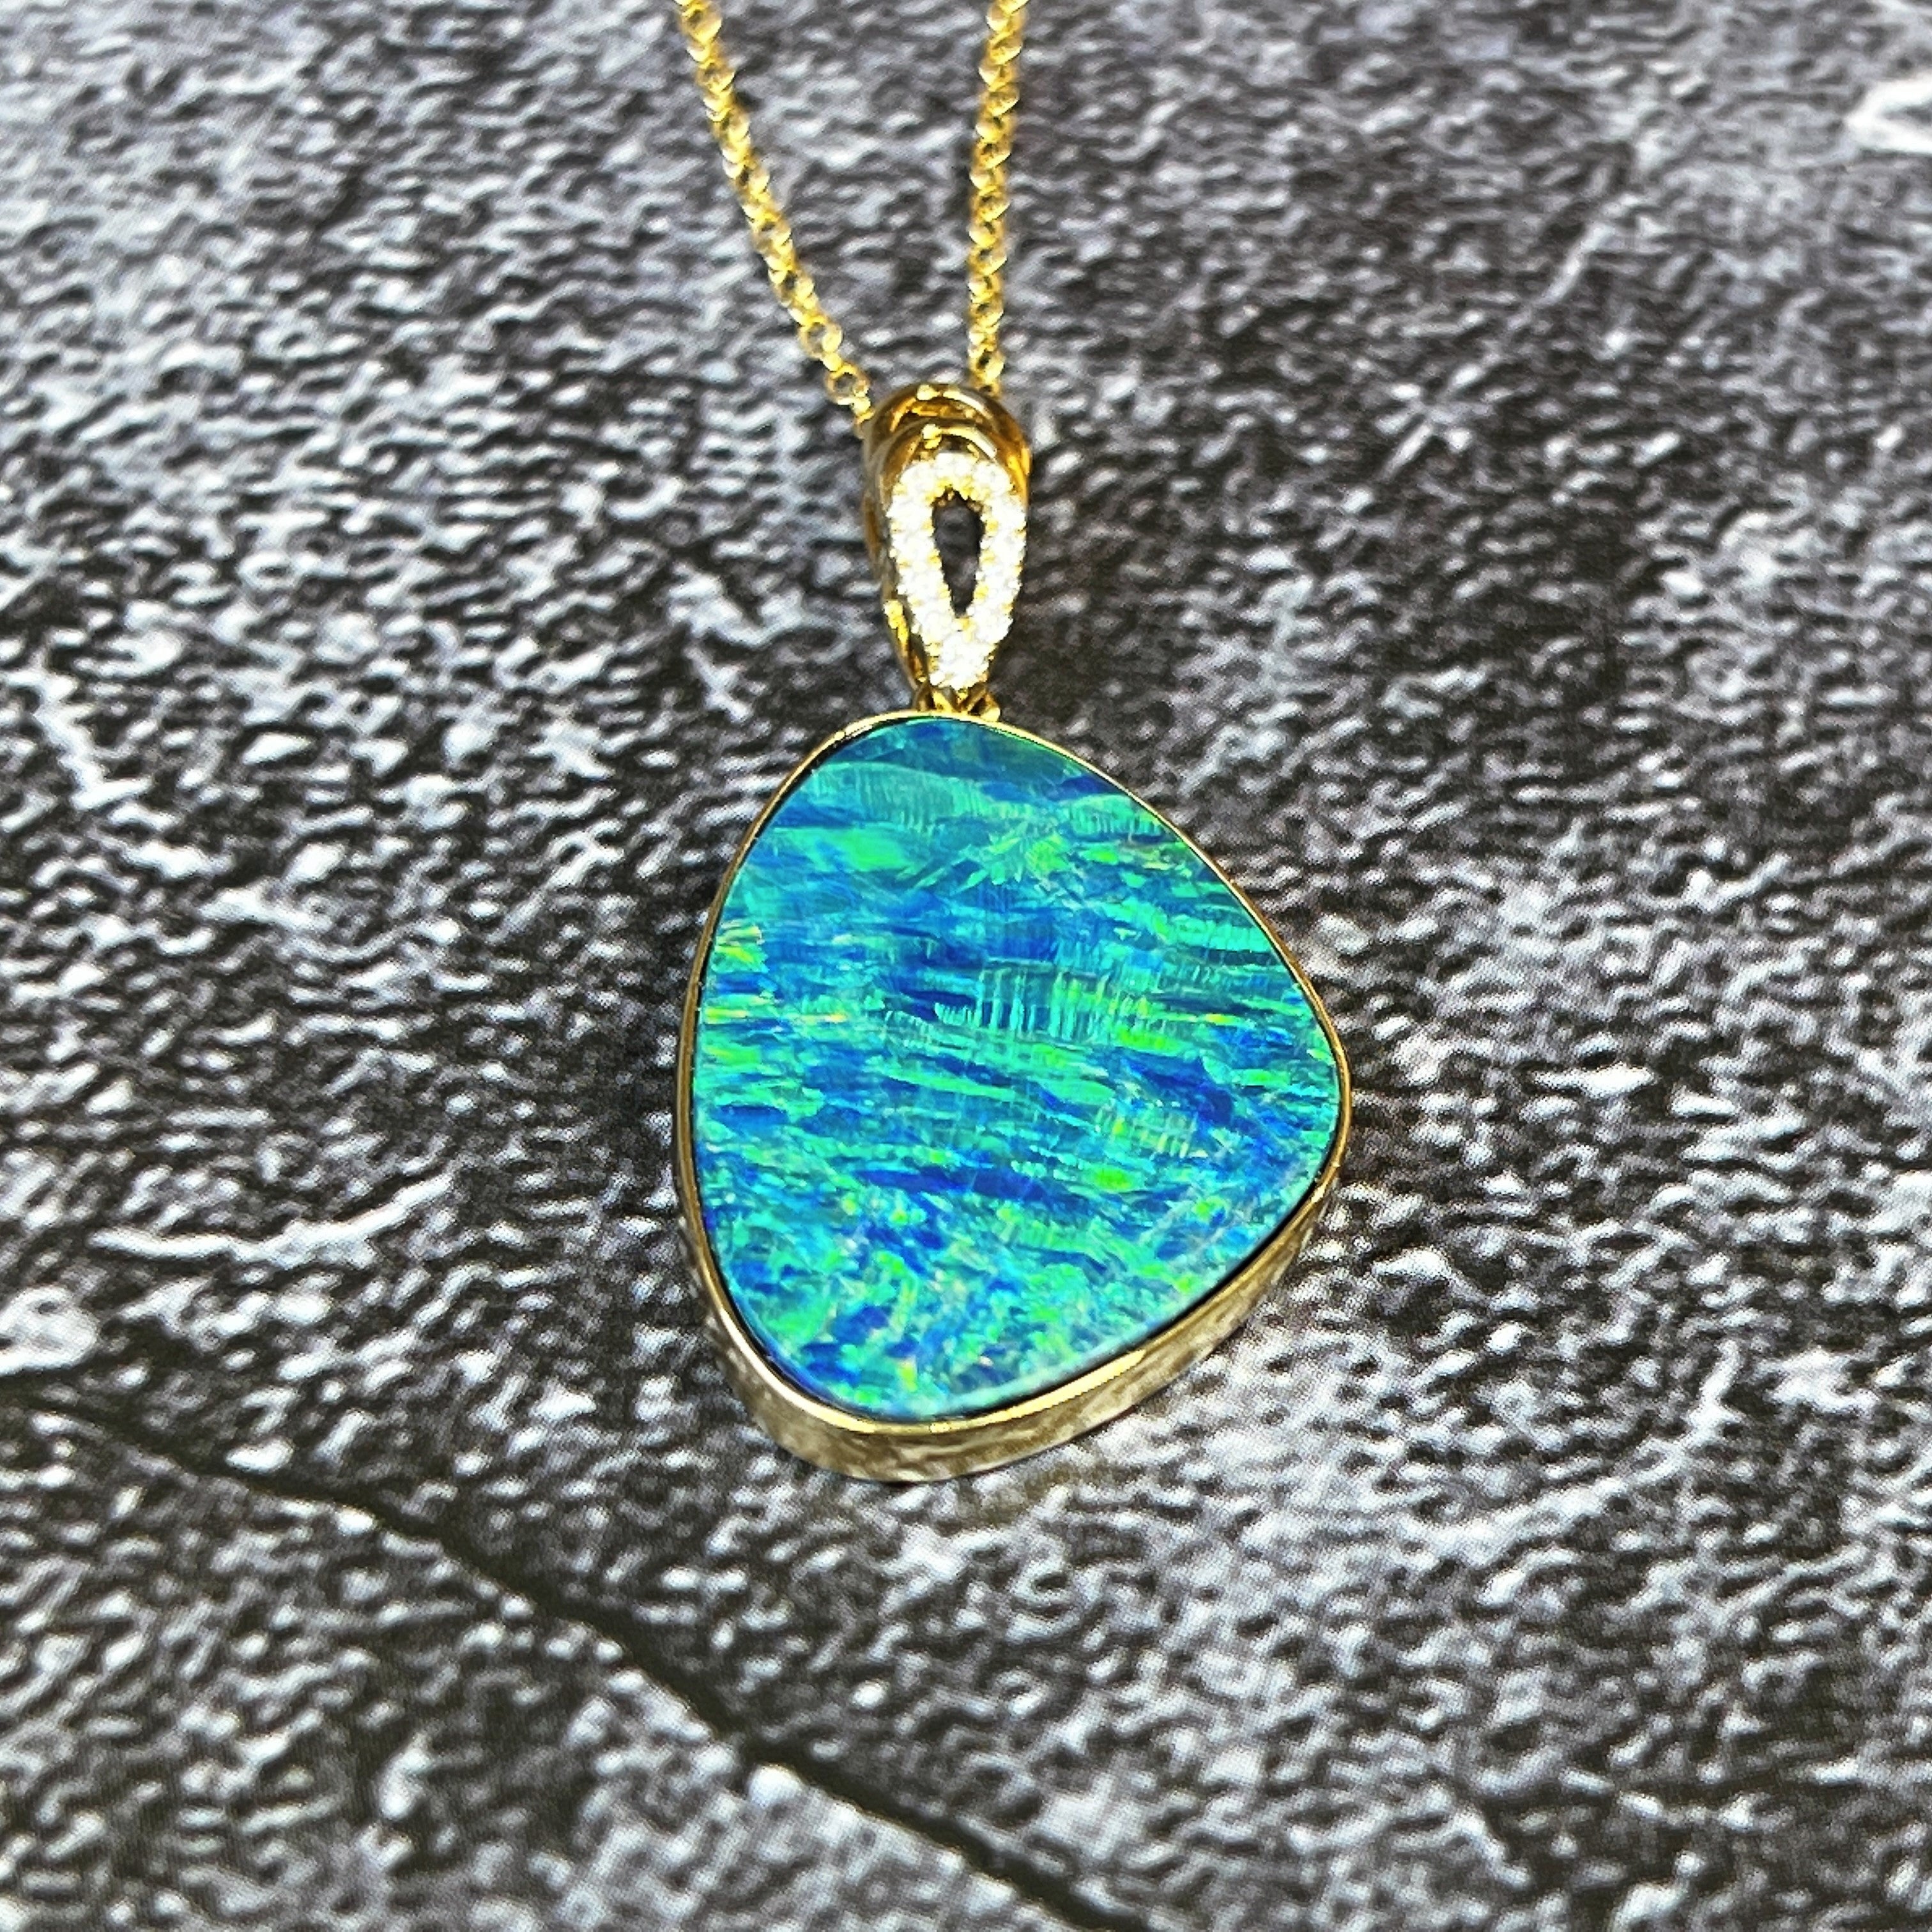 One 14kt Yellow Gold pendant with striped pattern Opal doublet and diamond bail loop - Masterpiece Jewellery Opal & Gems Sydney Australia | Online Shop